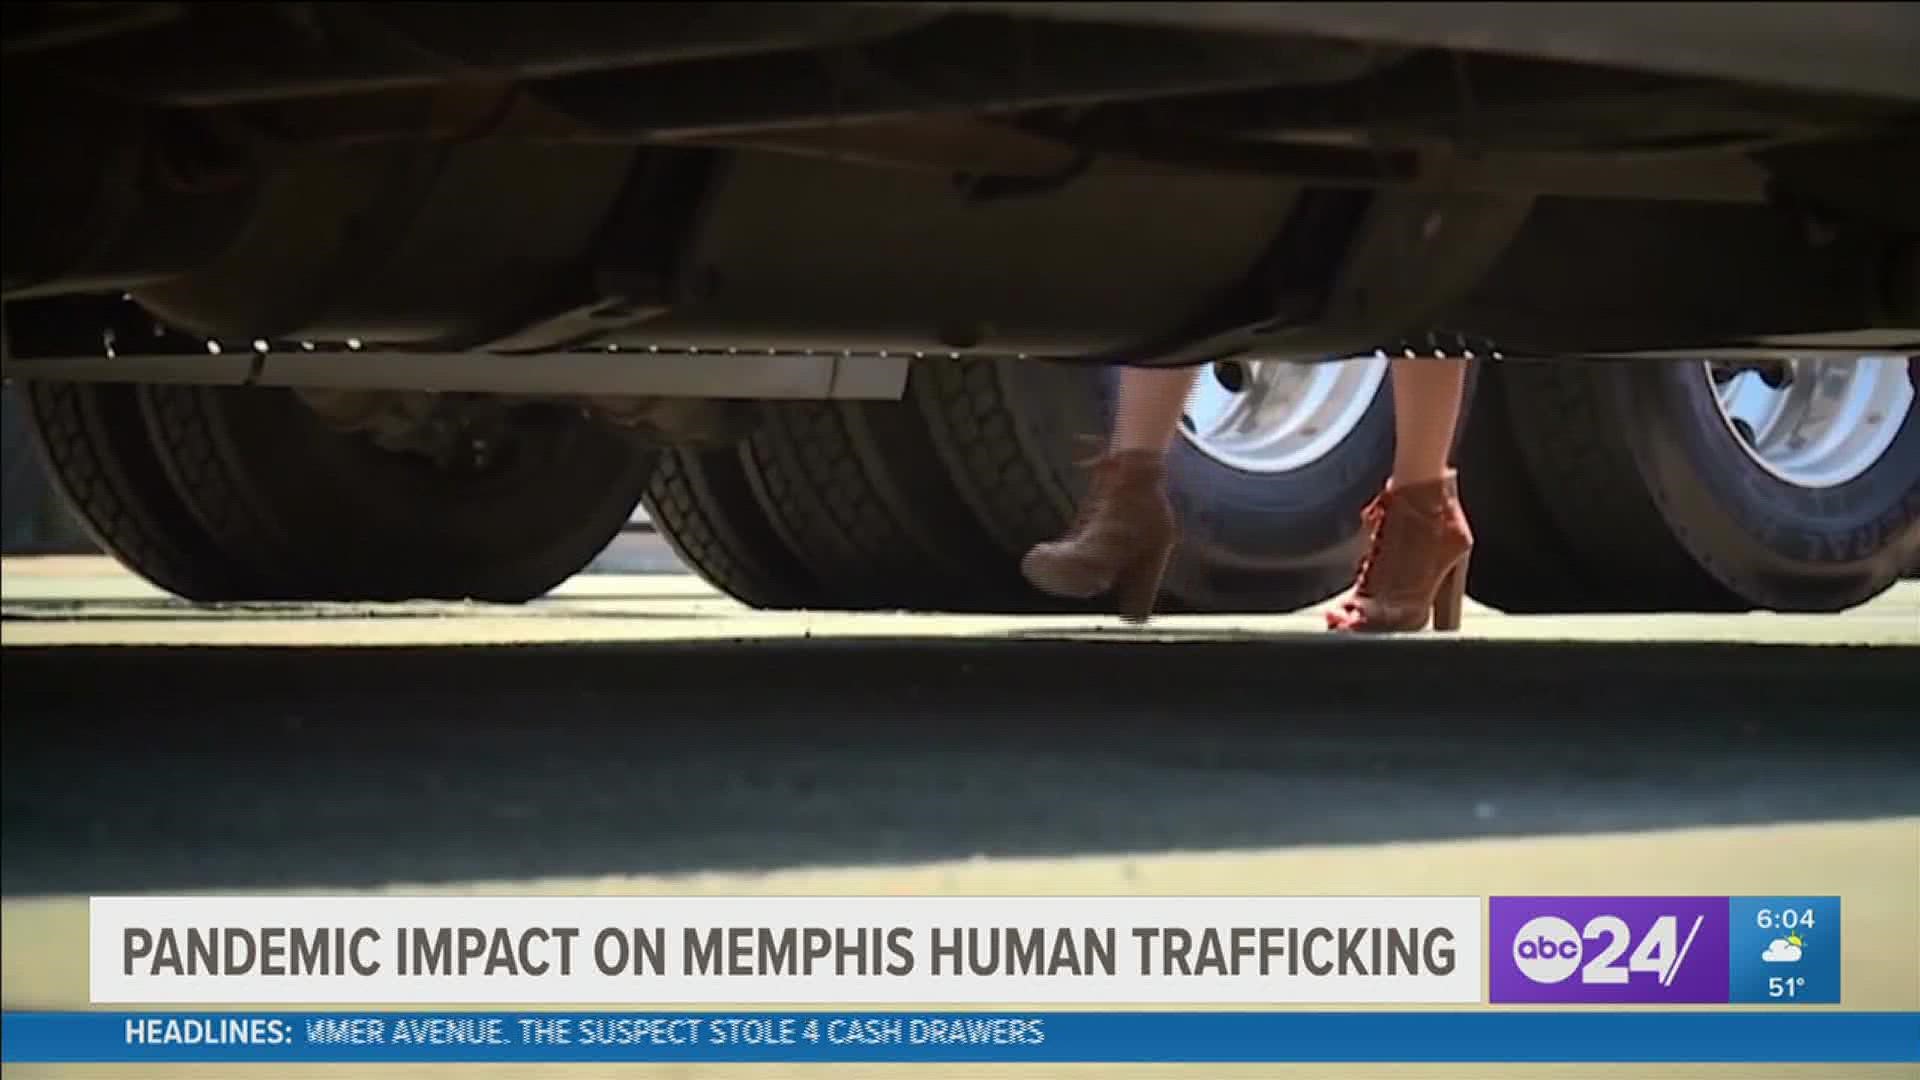 “I think that most human trafficking is going to be very difficult to spot just as kind of a one shot deal," said Rachel Haaga, Restore Corps Executive Director.